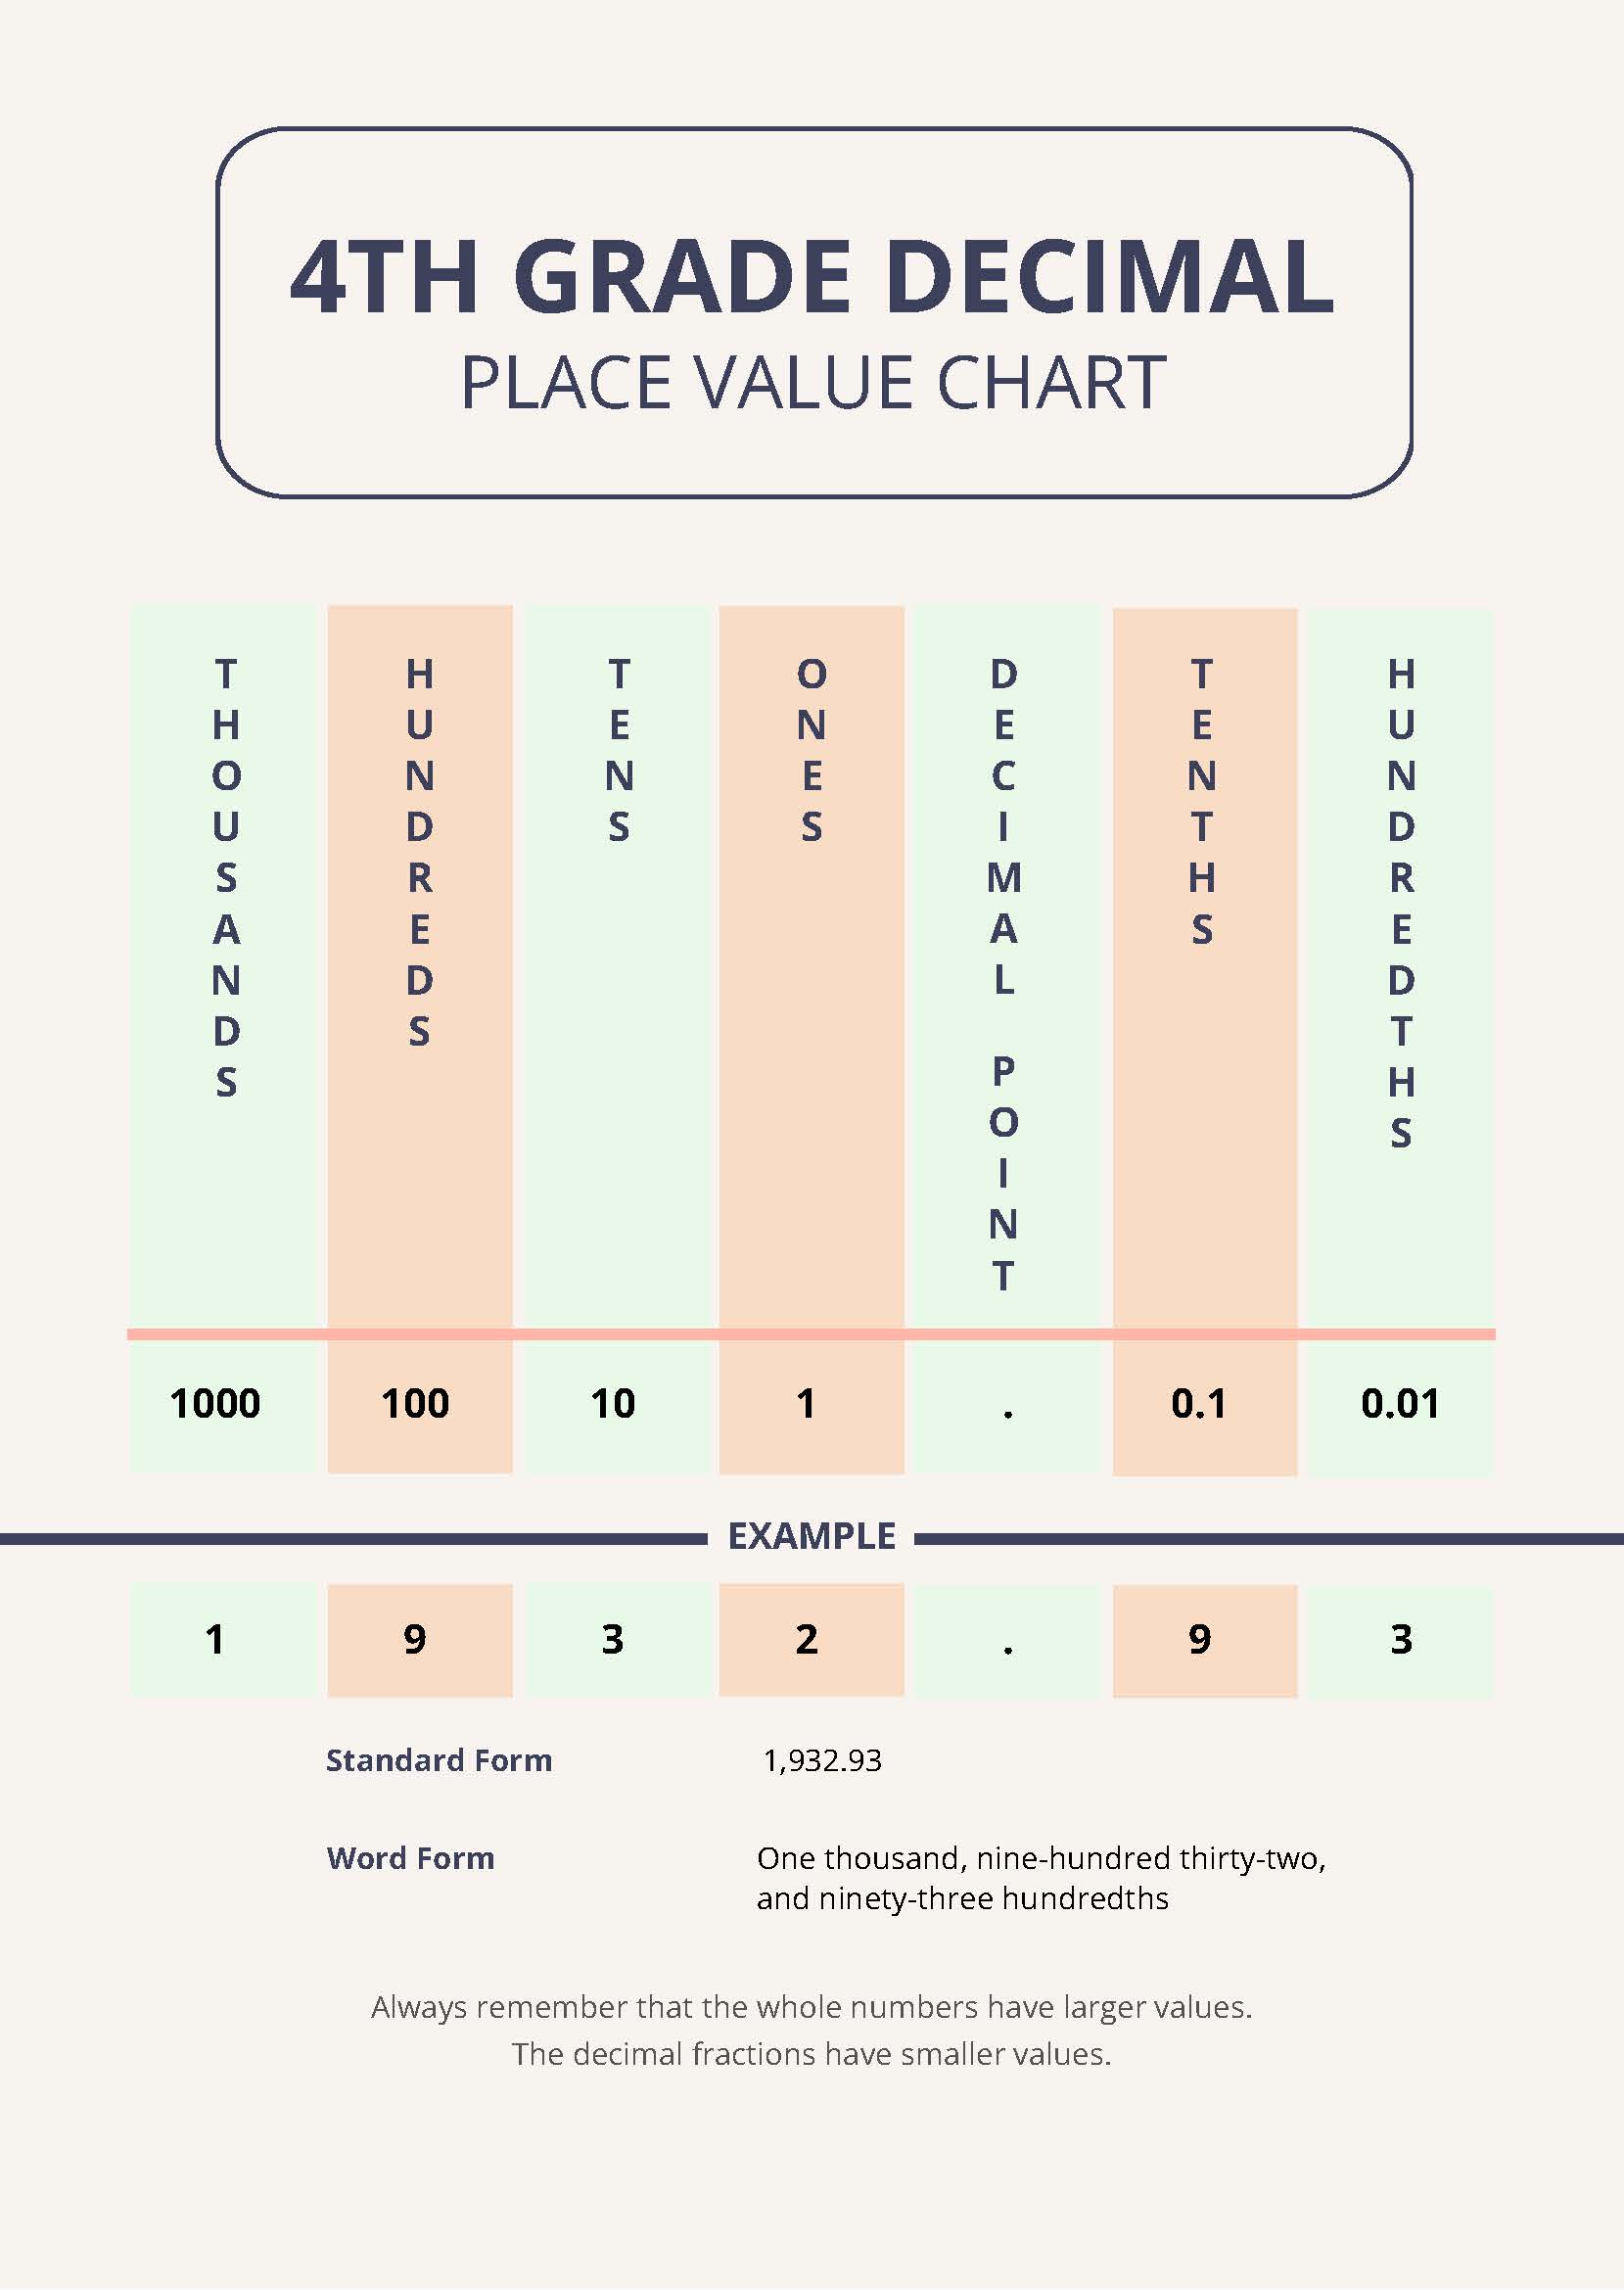 Free 4th Grade Decimal Place Value Chart Download In PDF Template